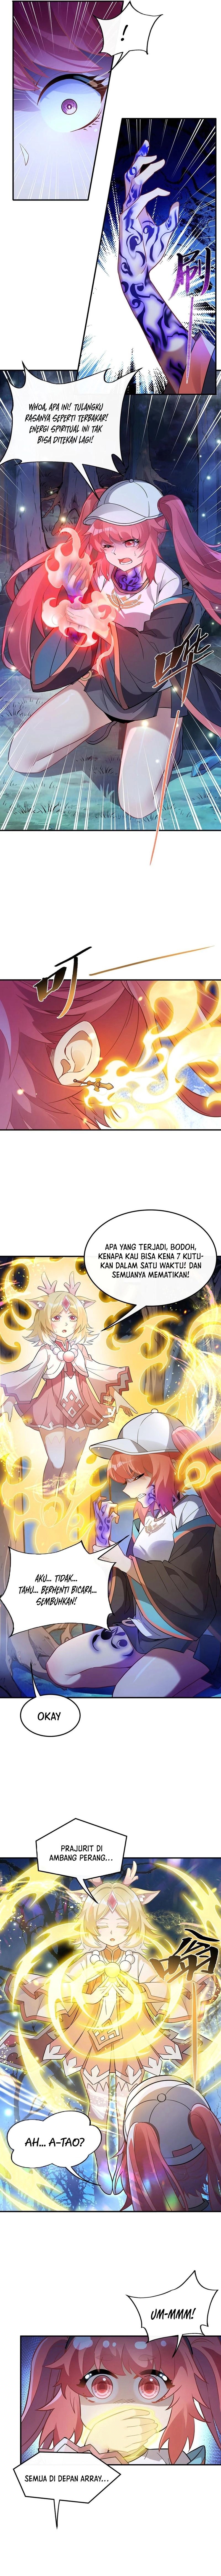 Dilarang COPAS - situs resmi www.mangacanblog.com - Komik my female apprentices are all big shots from the future 259 - chapter 259 260 Indonesia my female apprentices are all big shots from the future 259 - chapter 259 Terbaru 5|Baca Manga Komik Indonesia|Mangacan